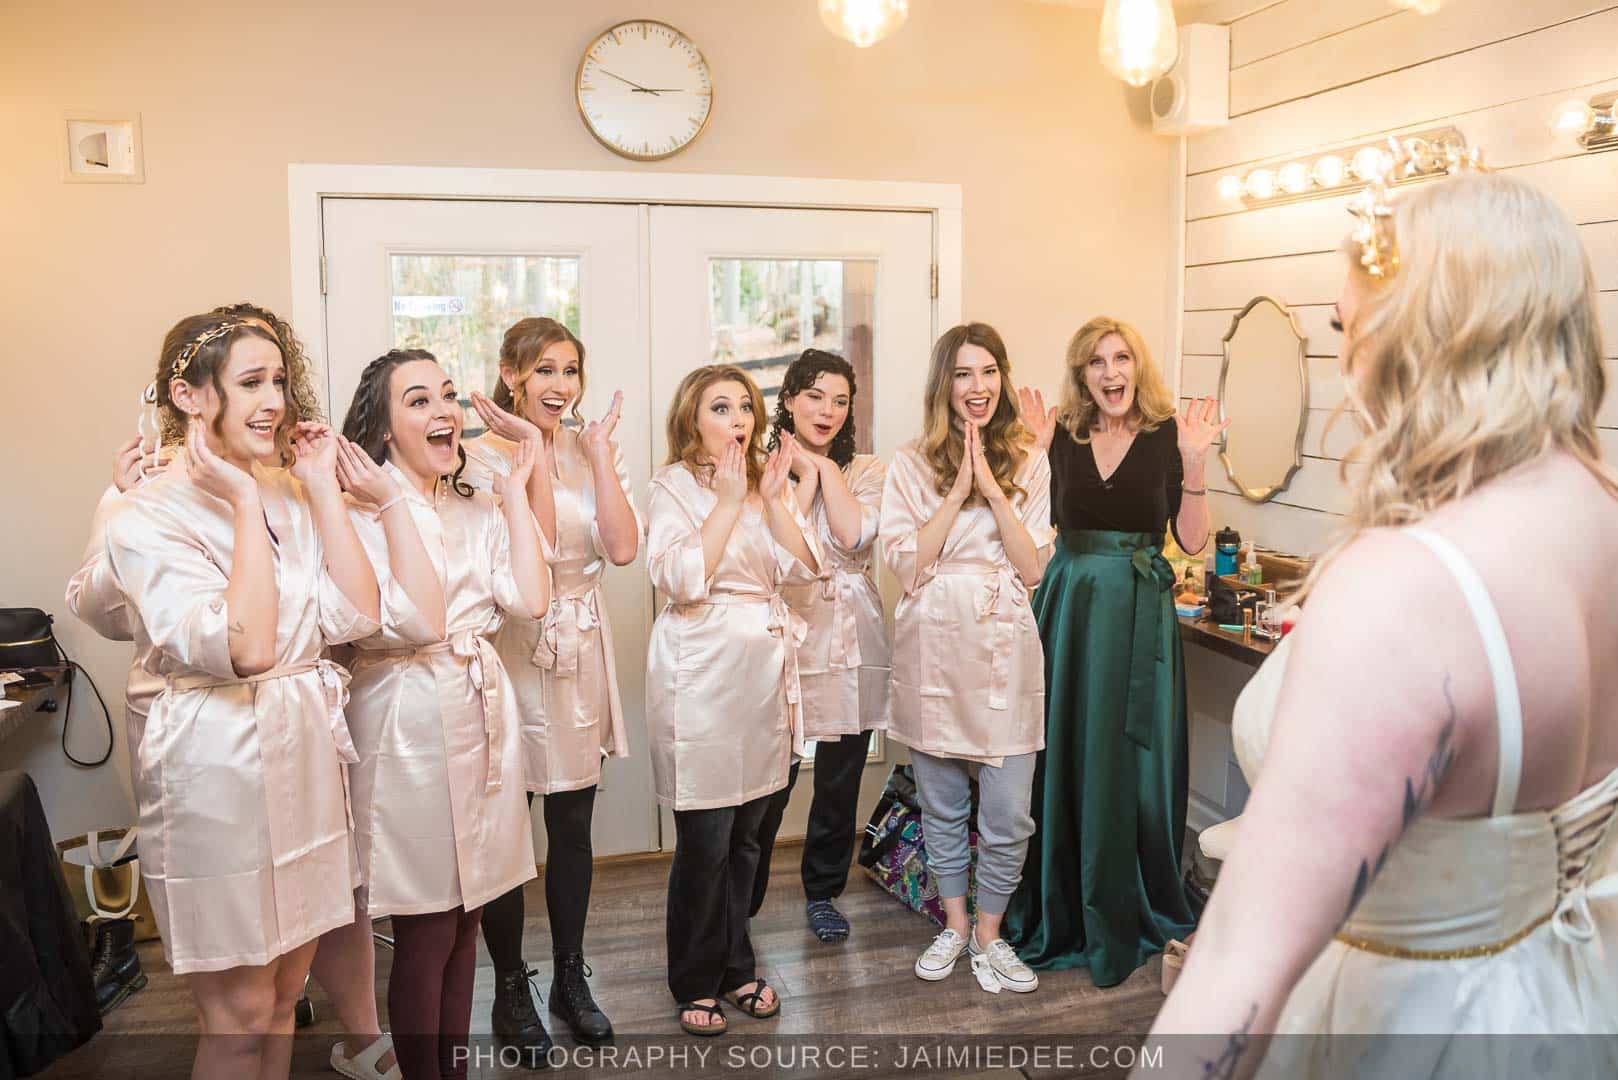 Rocky's Lake Estate Wedding Venue - getting ready in the bridal suite - first look with bride and bridesmaids in bride's suite